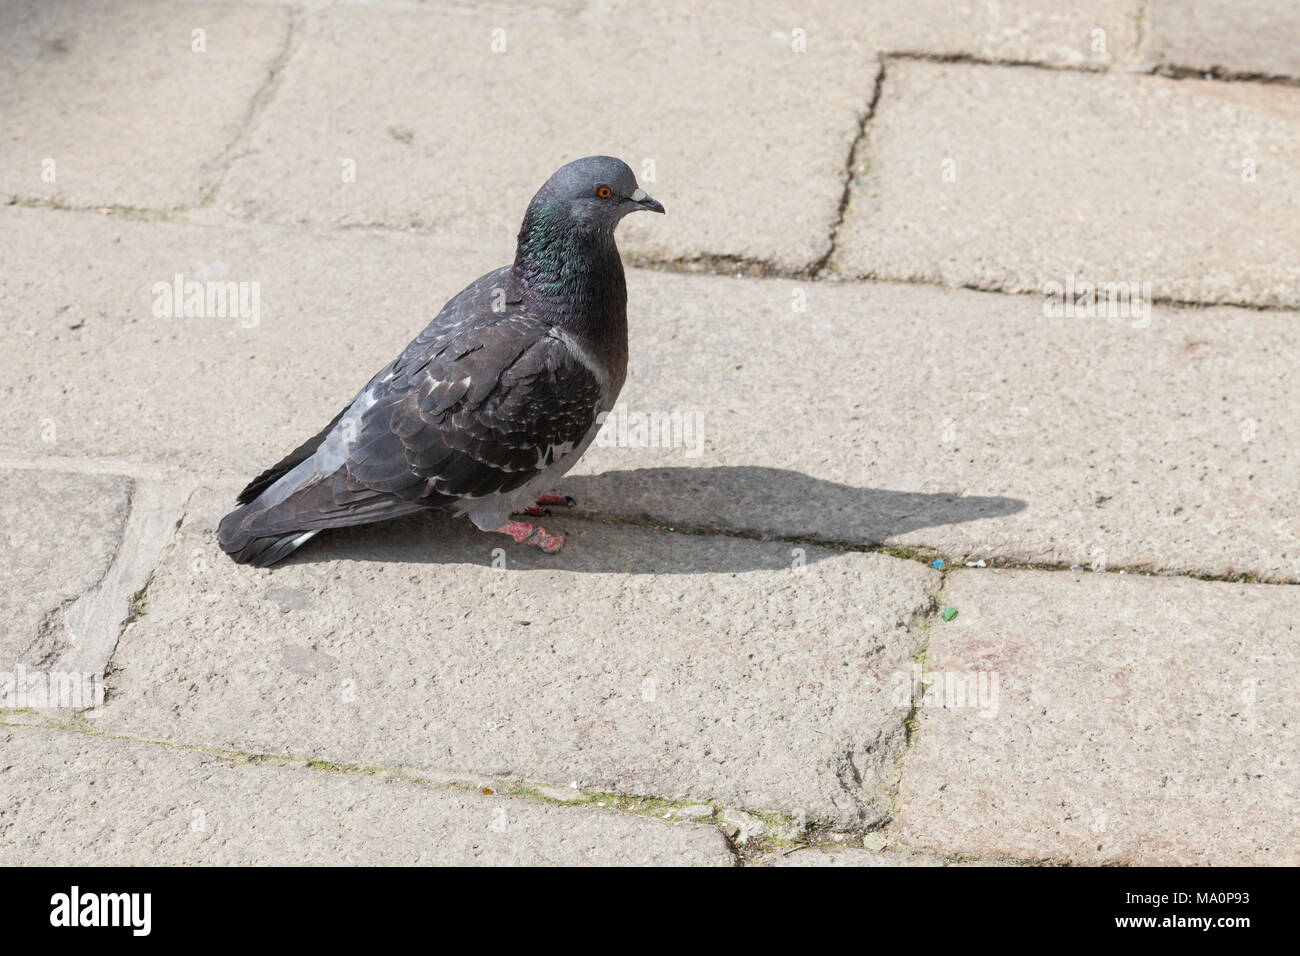 Disabled feral Rock Pigeon (Columbidae) with a missing foot and necrosis due to constriction of the leg standing in profile on urban paving stones Stock Photo